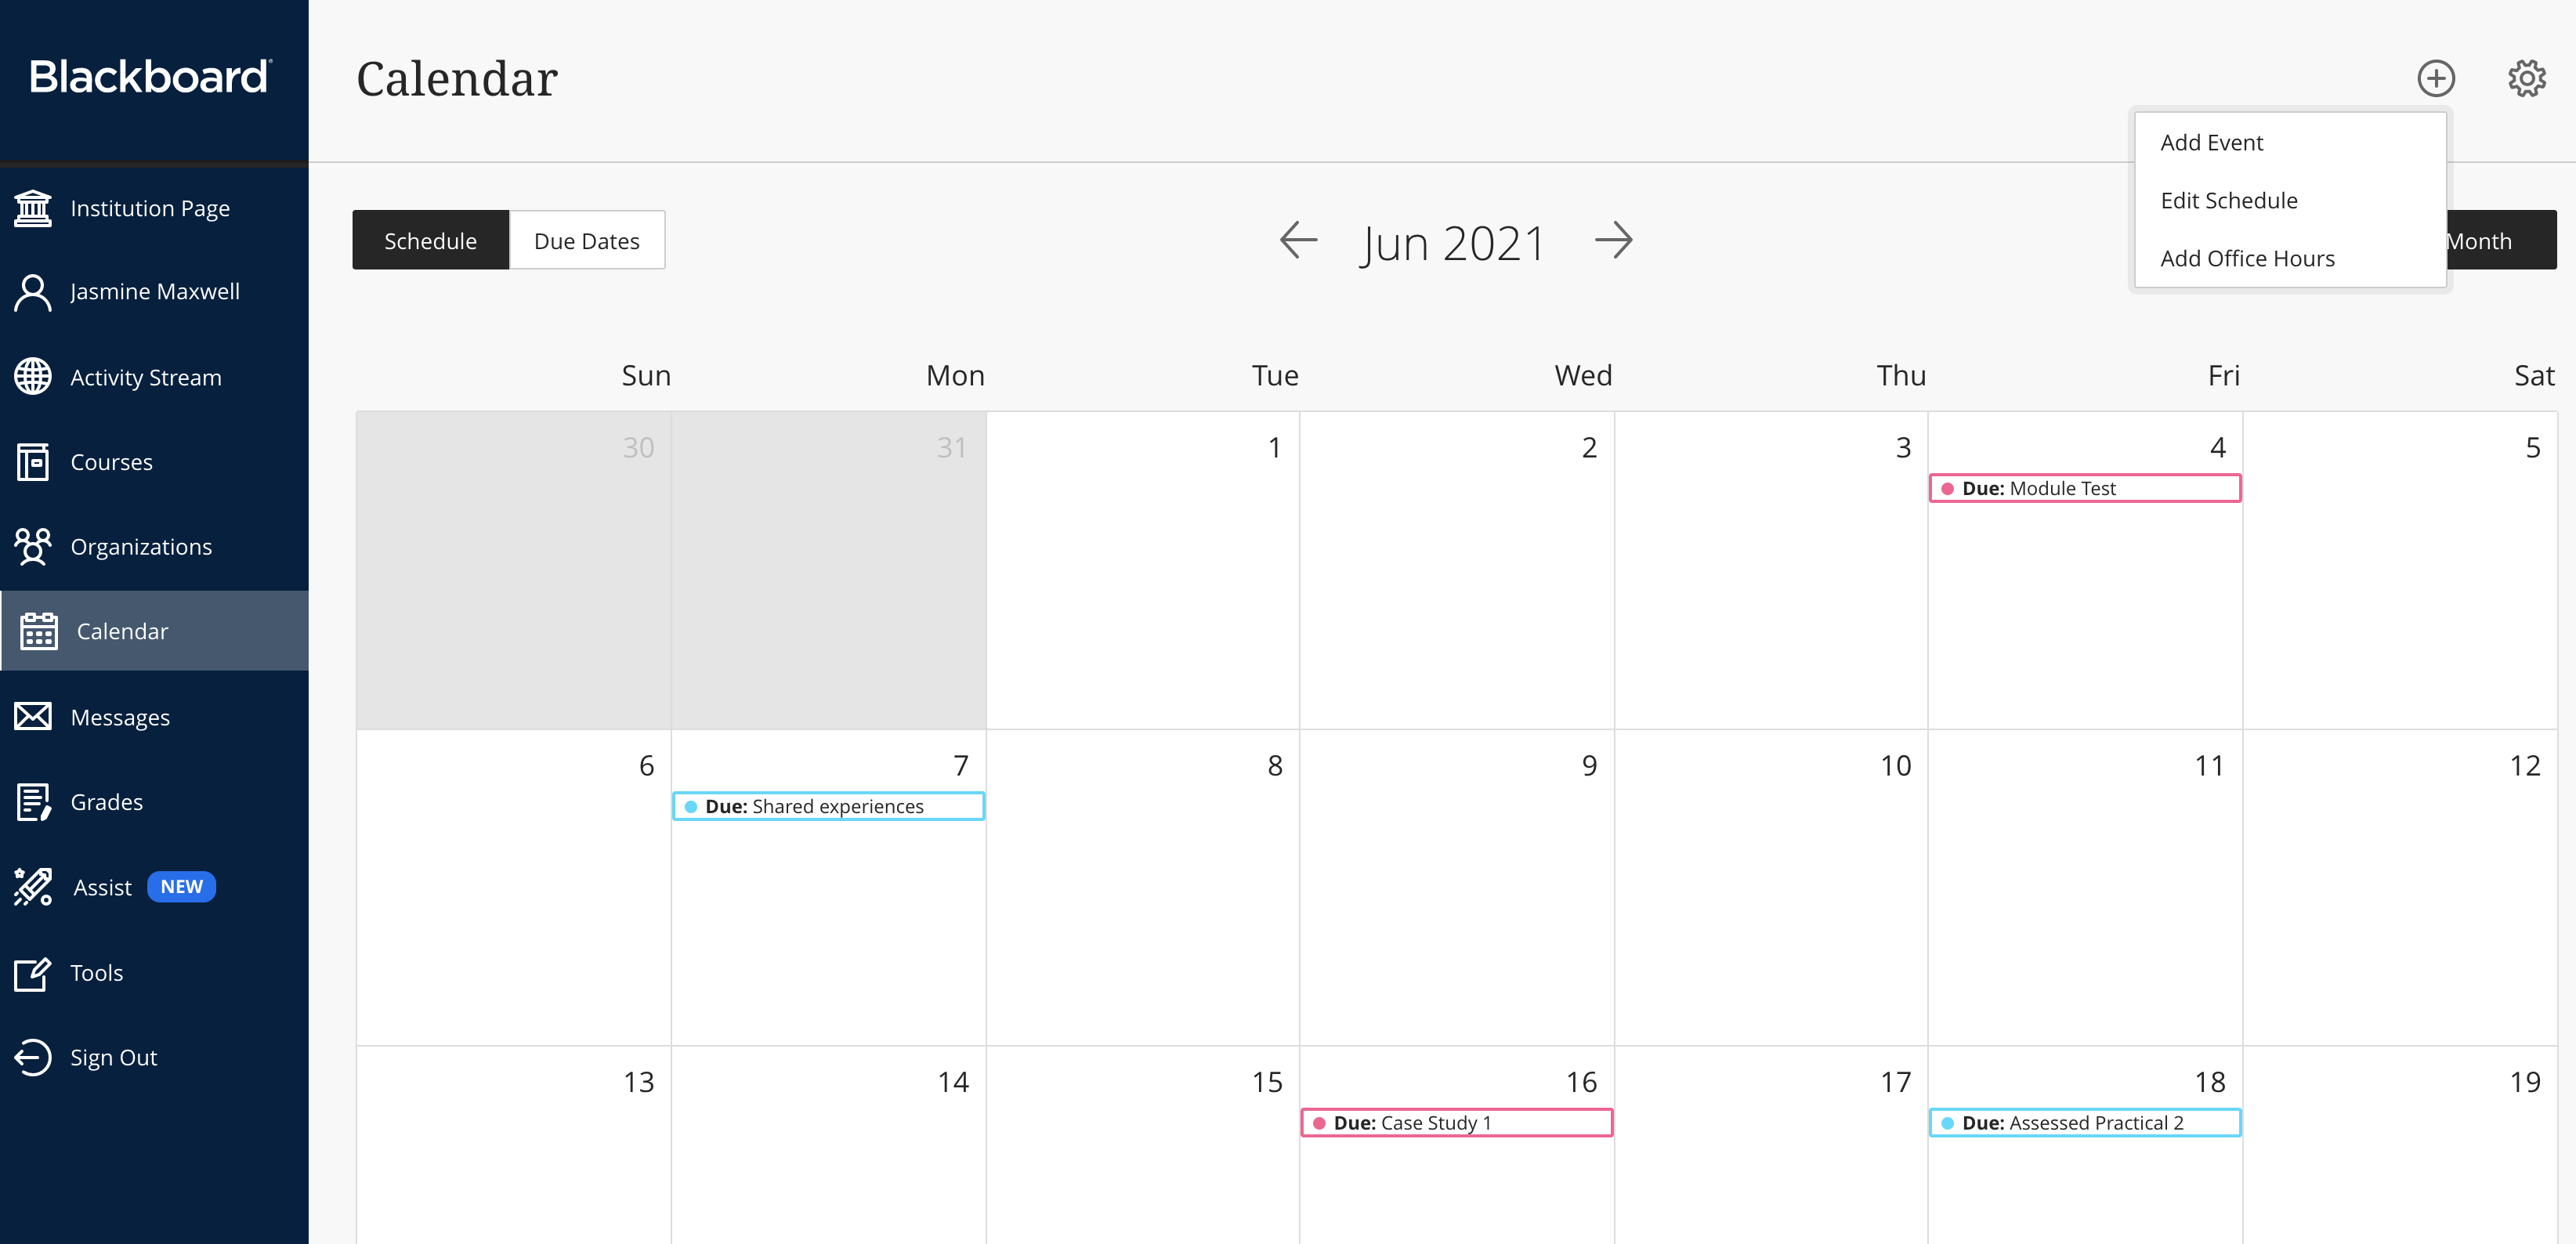 Image of Calendar page from Base Navigation